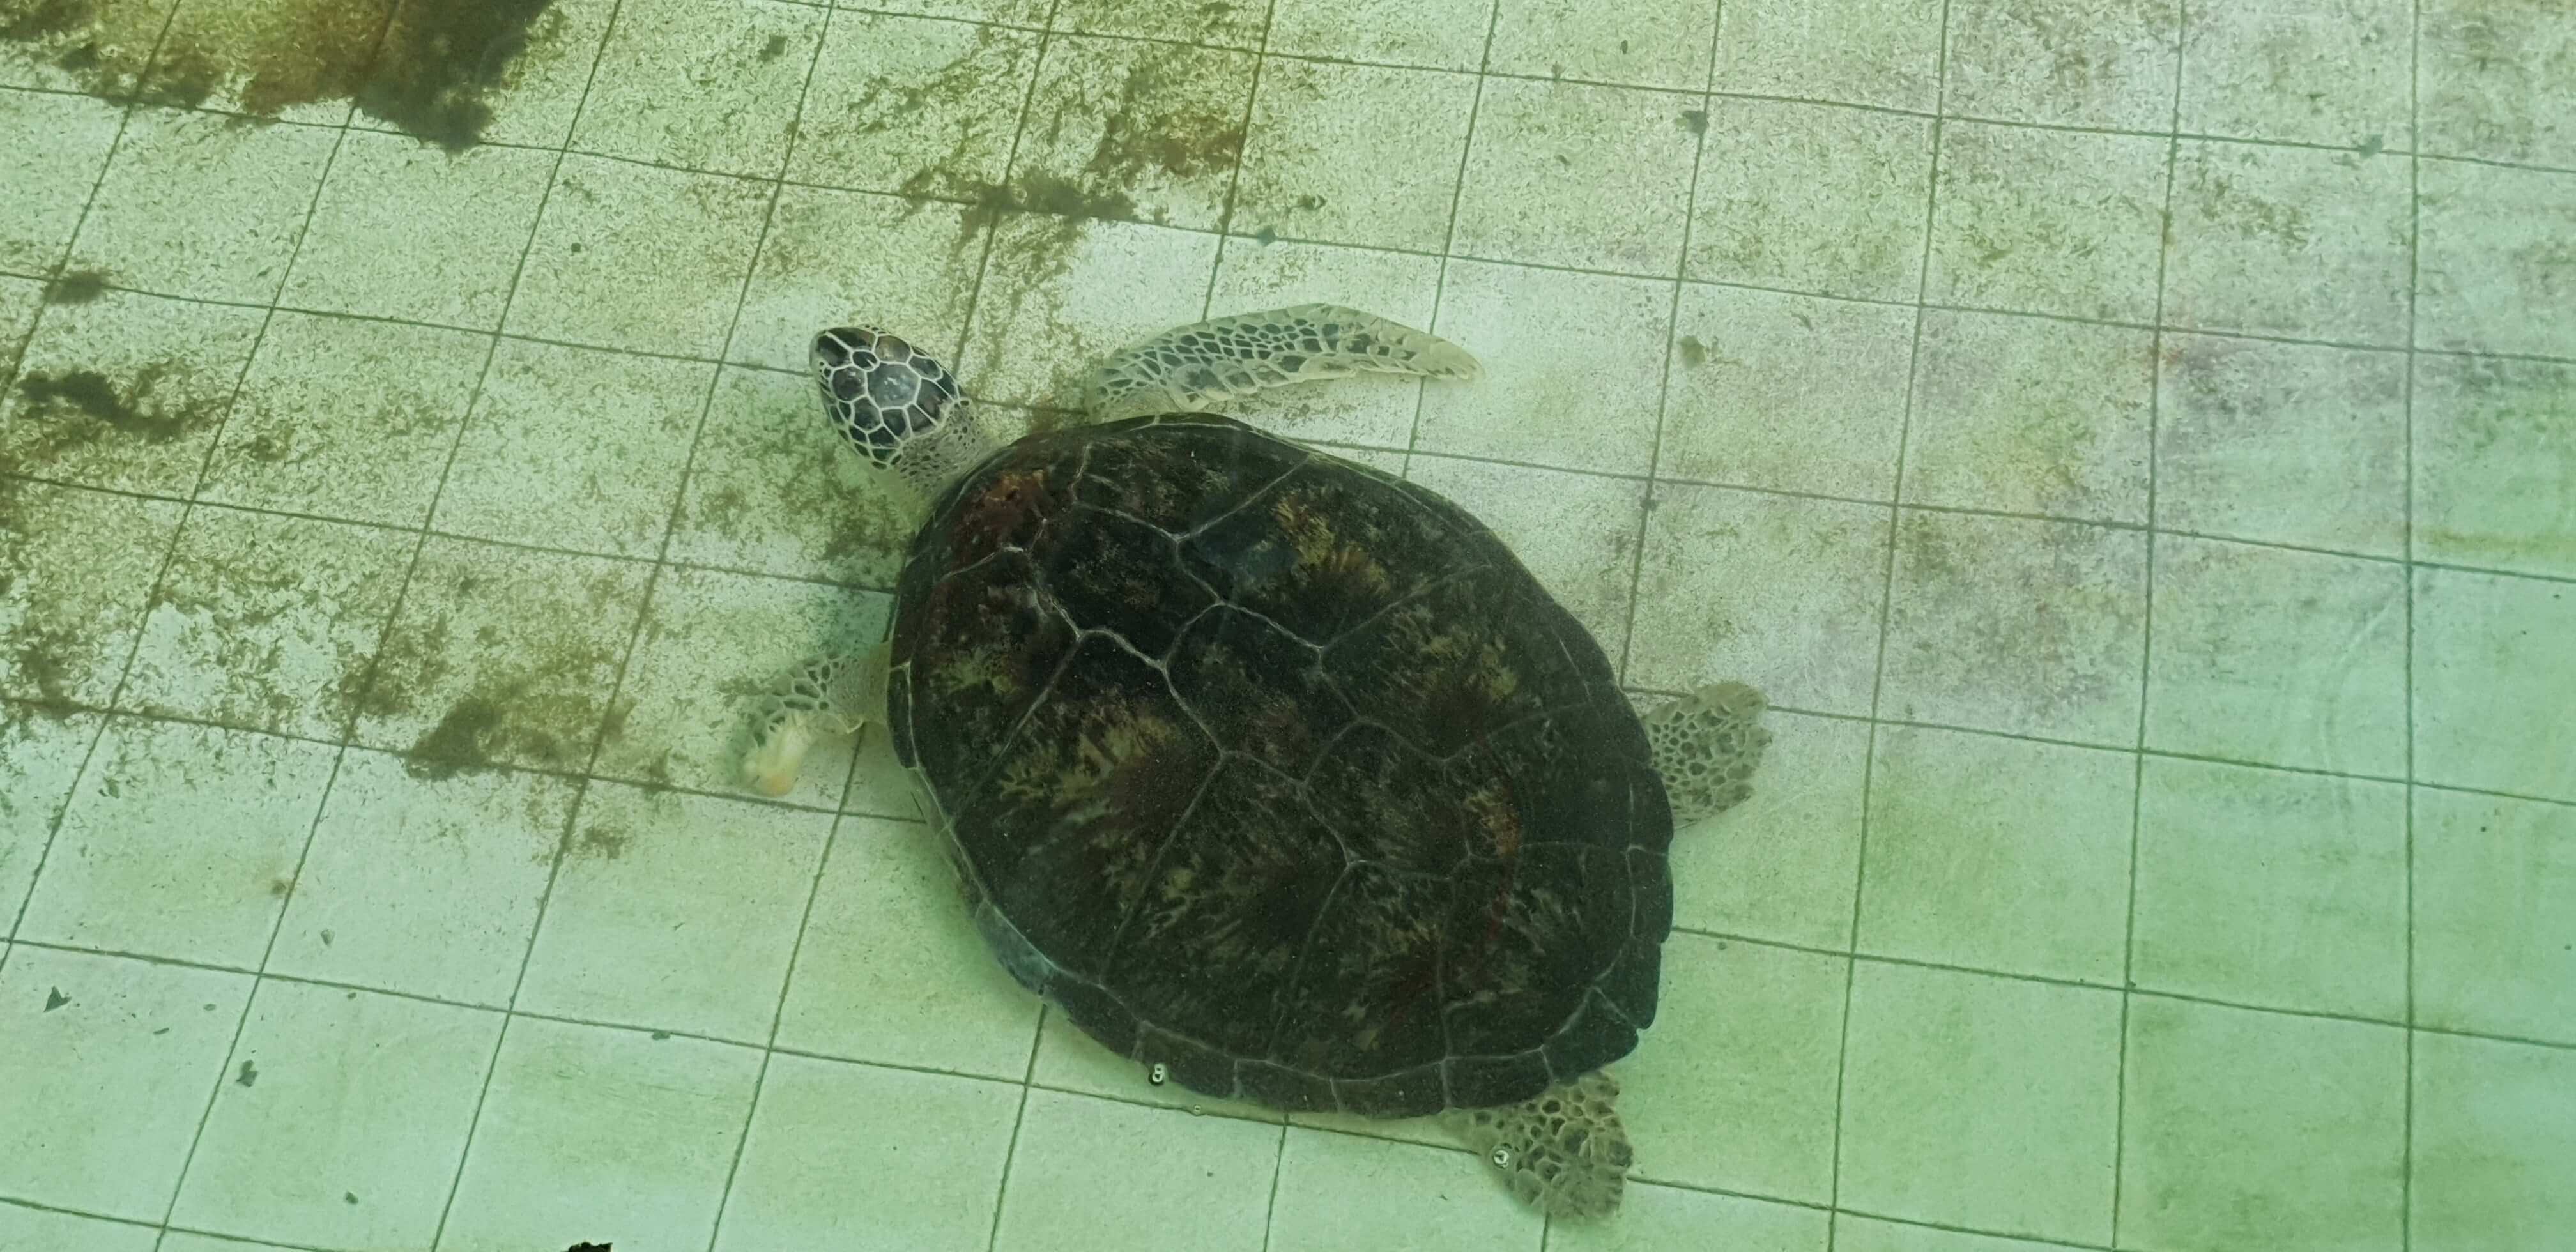 A rehabilitating turtle at the Turtle Conservation and Education Centre